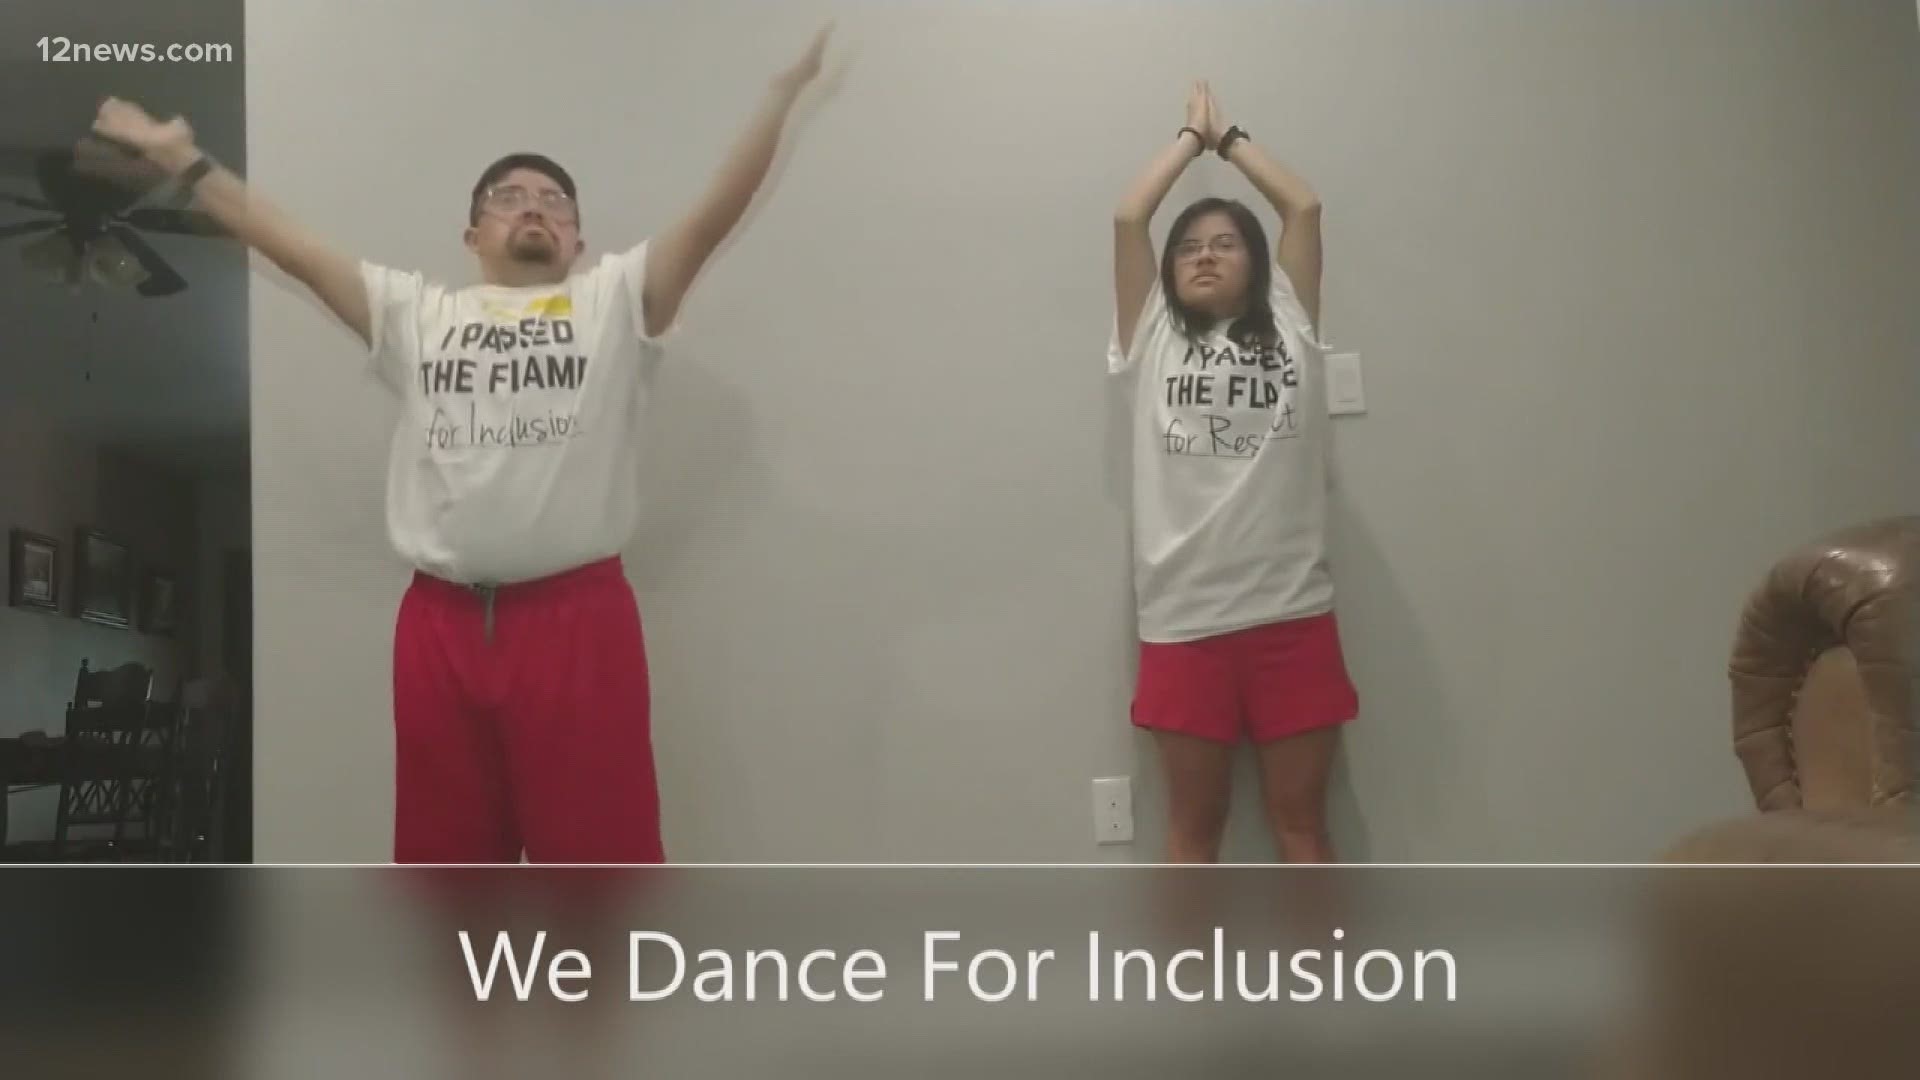 With competitions and events cancelled through June, the Special Olympics is hosting a virtual dance fundraiser.